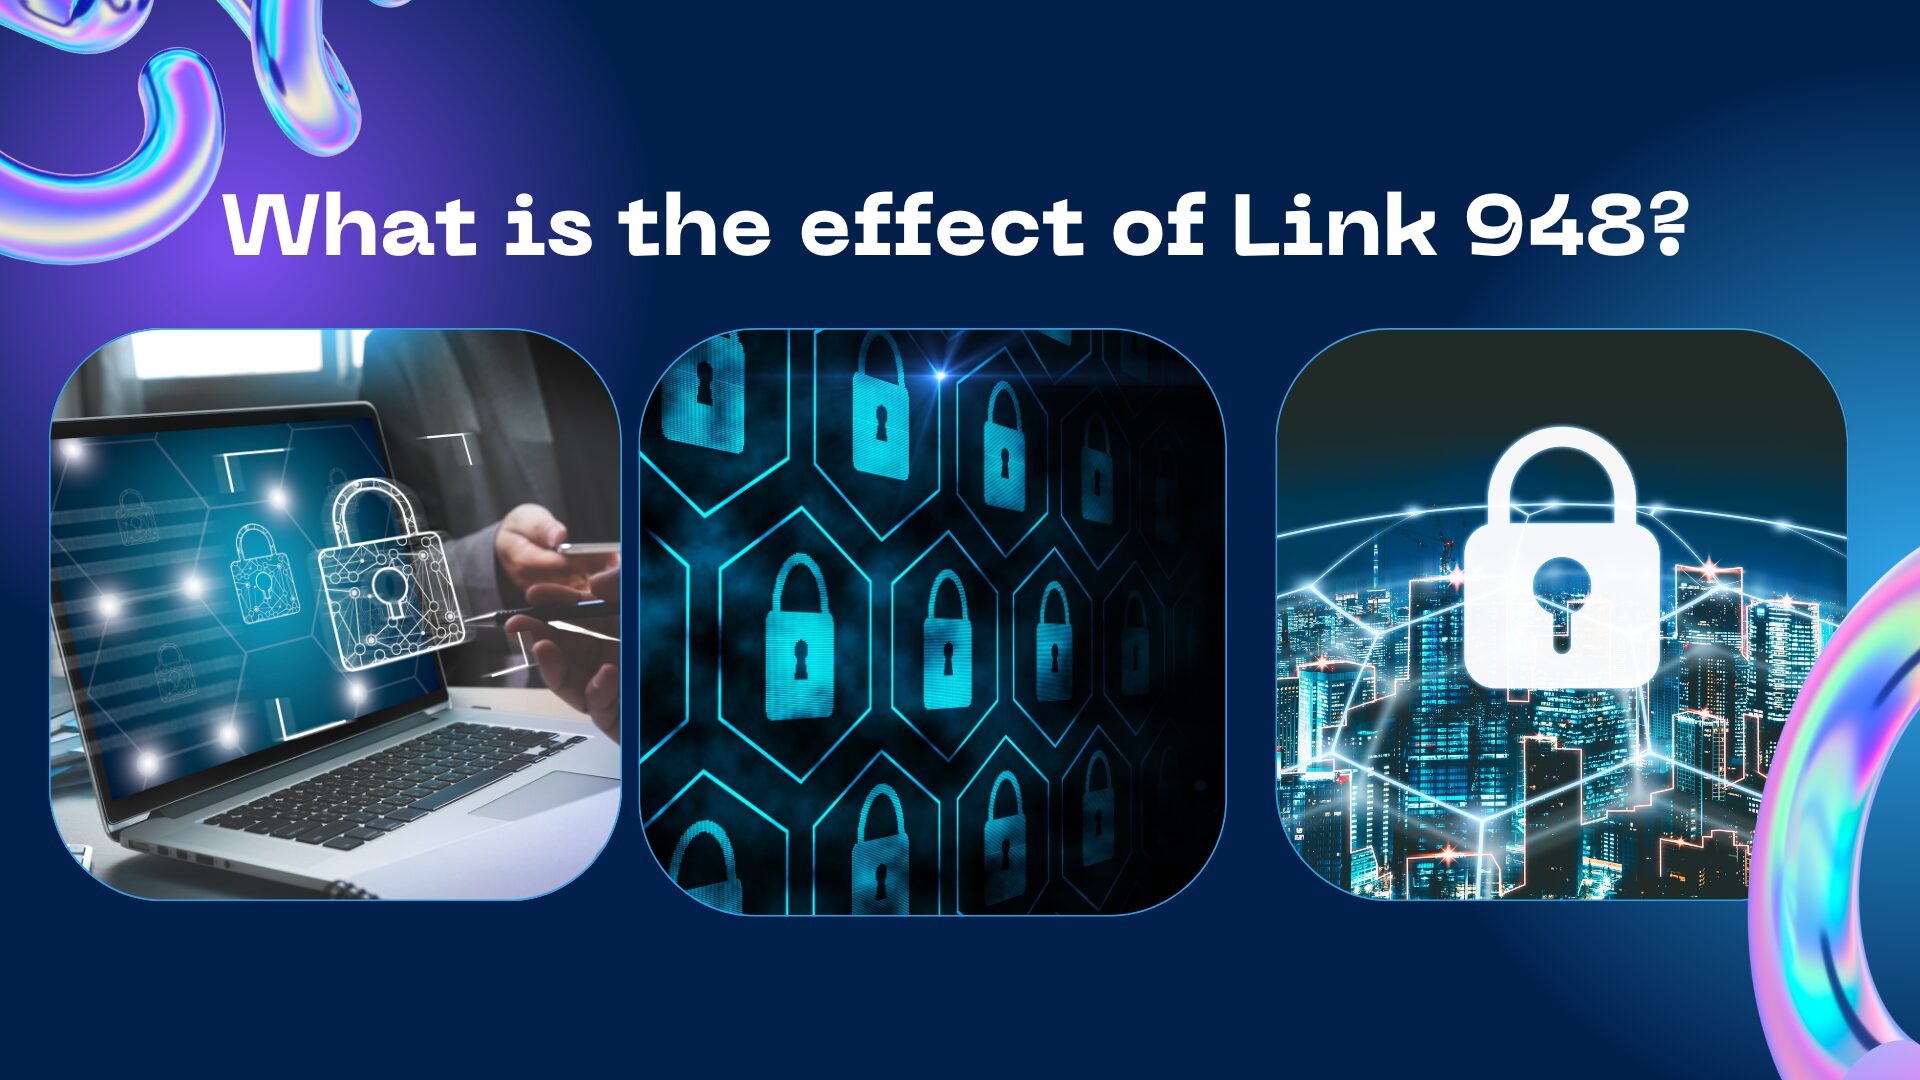 What is effect of Link 948?